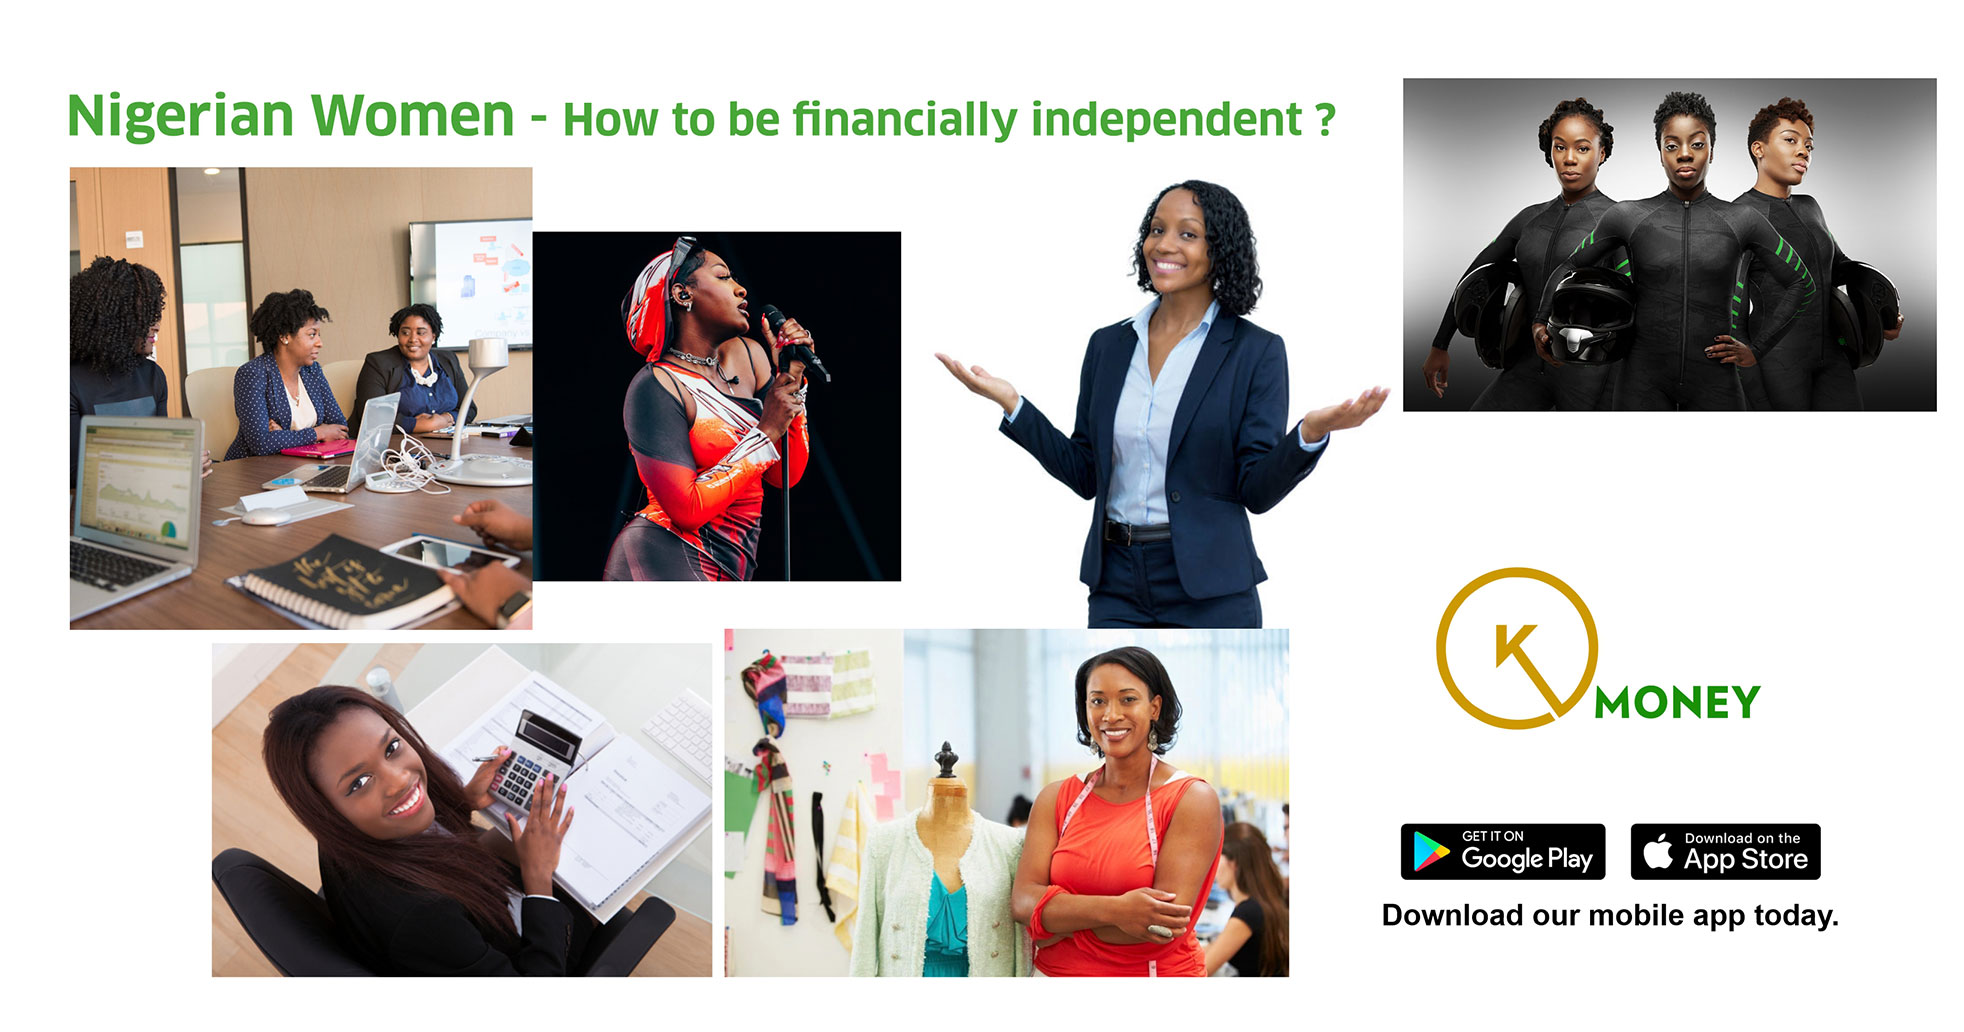 Nigerian Women - How to Achieve Financial Independence